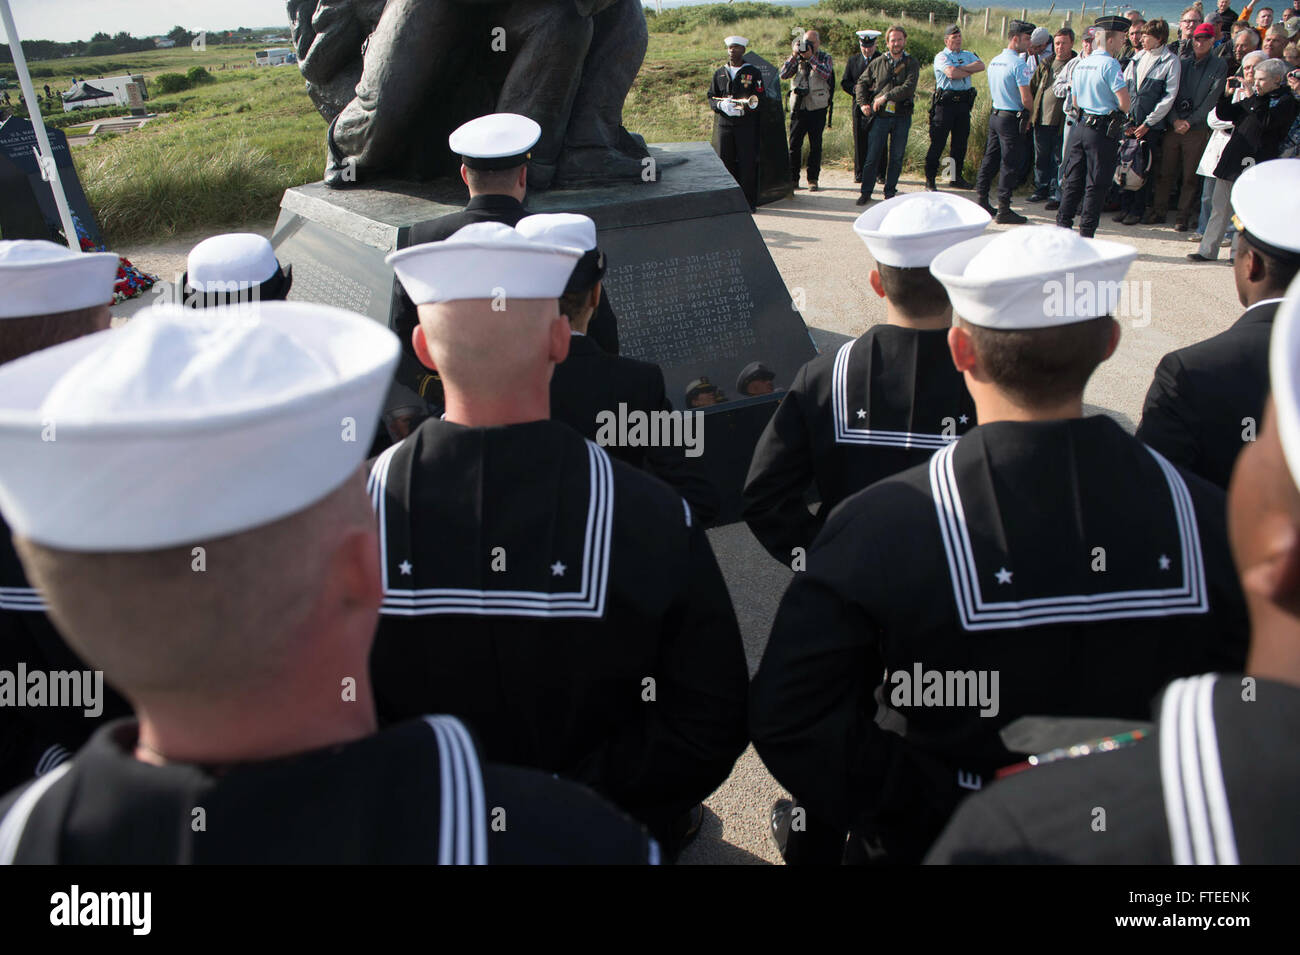 140605-N-YO152-132 UTAH BEACH, France (June 5, 2014) - Sailors assigned to the guided-missile destroyer USS Oscar Austin (DDG 79) stand at parade rest while awaiting commencement of the D-Day ceremony at the Navy Memorial on Utah Beach. The event was one of several commemorations of the 70th Anniversary of D-Day operations conducted by Allied forces World War II June 5-6, 1944. Over 650 U.S. military personnel have joined troops from several NATO nations to participate in ceremonies to honor the events at the invitation of the French government. (U.S. Navy photo by Mass Communication Specialis Stock Photo